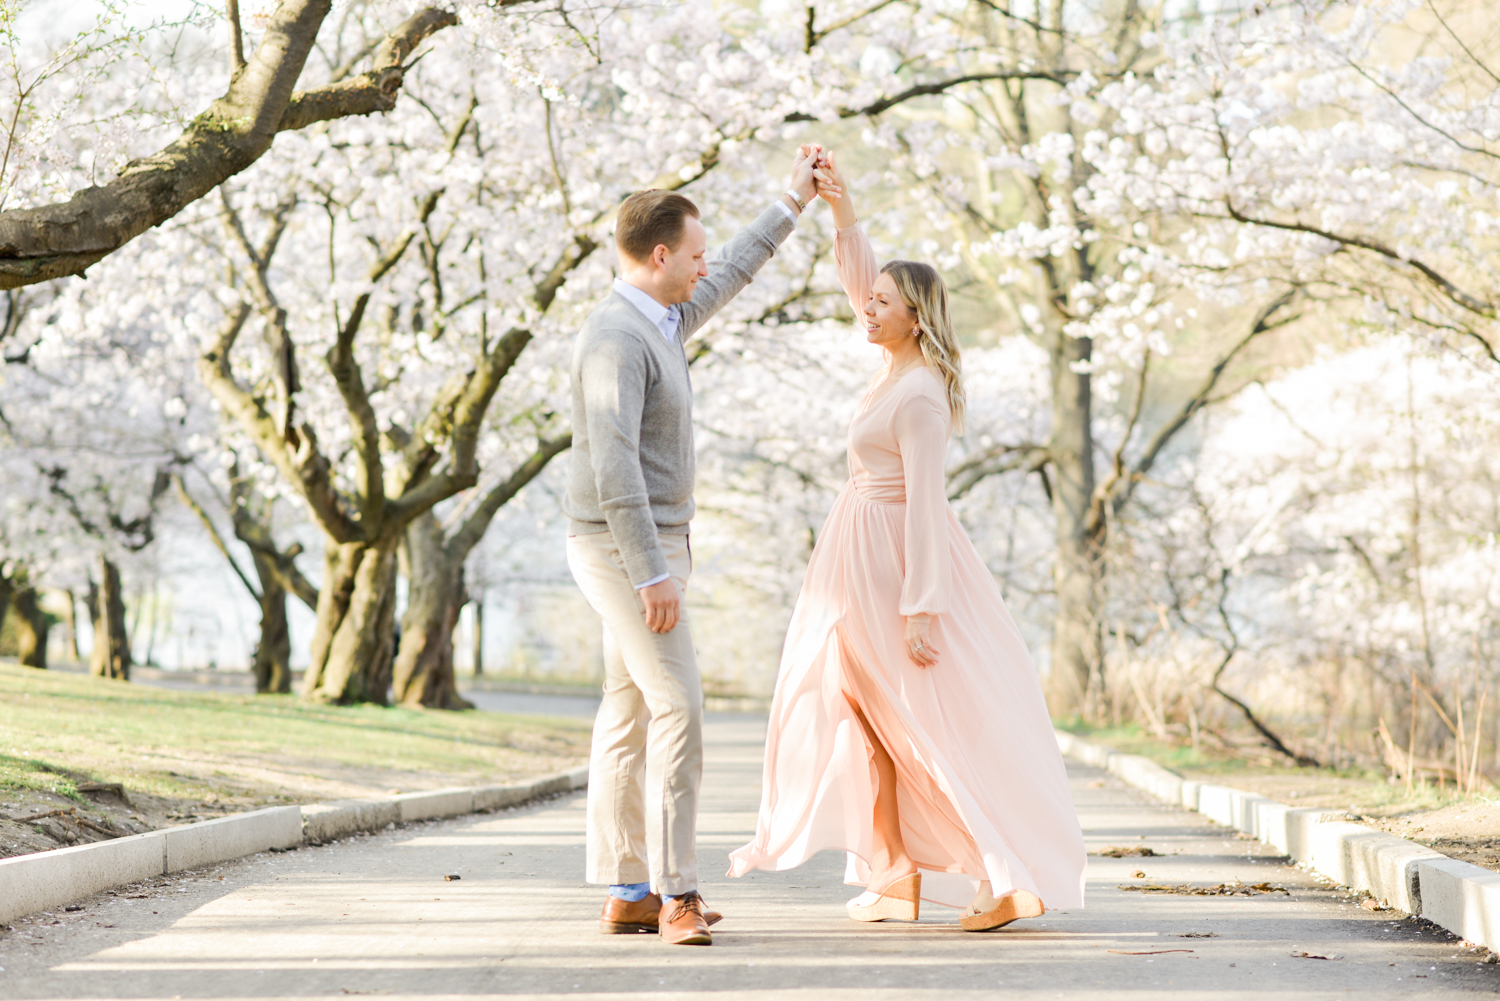 Engagement photo with cherry blossoms in high park